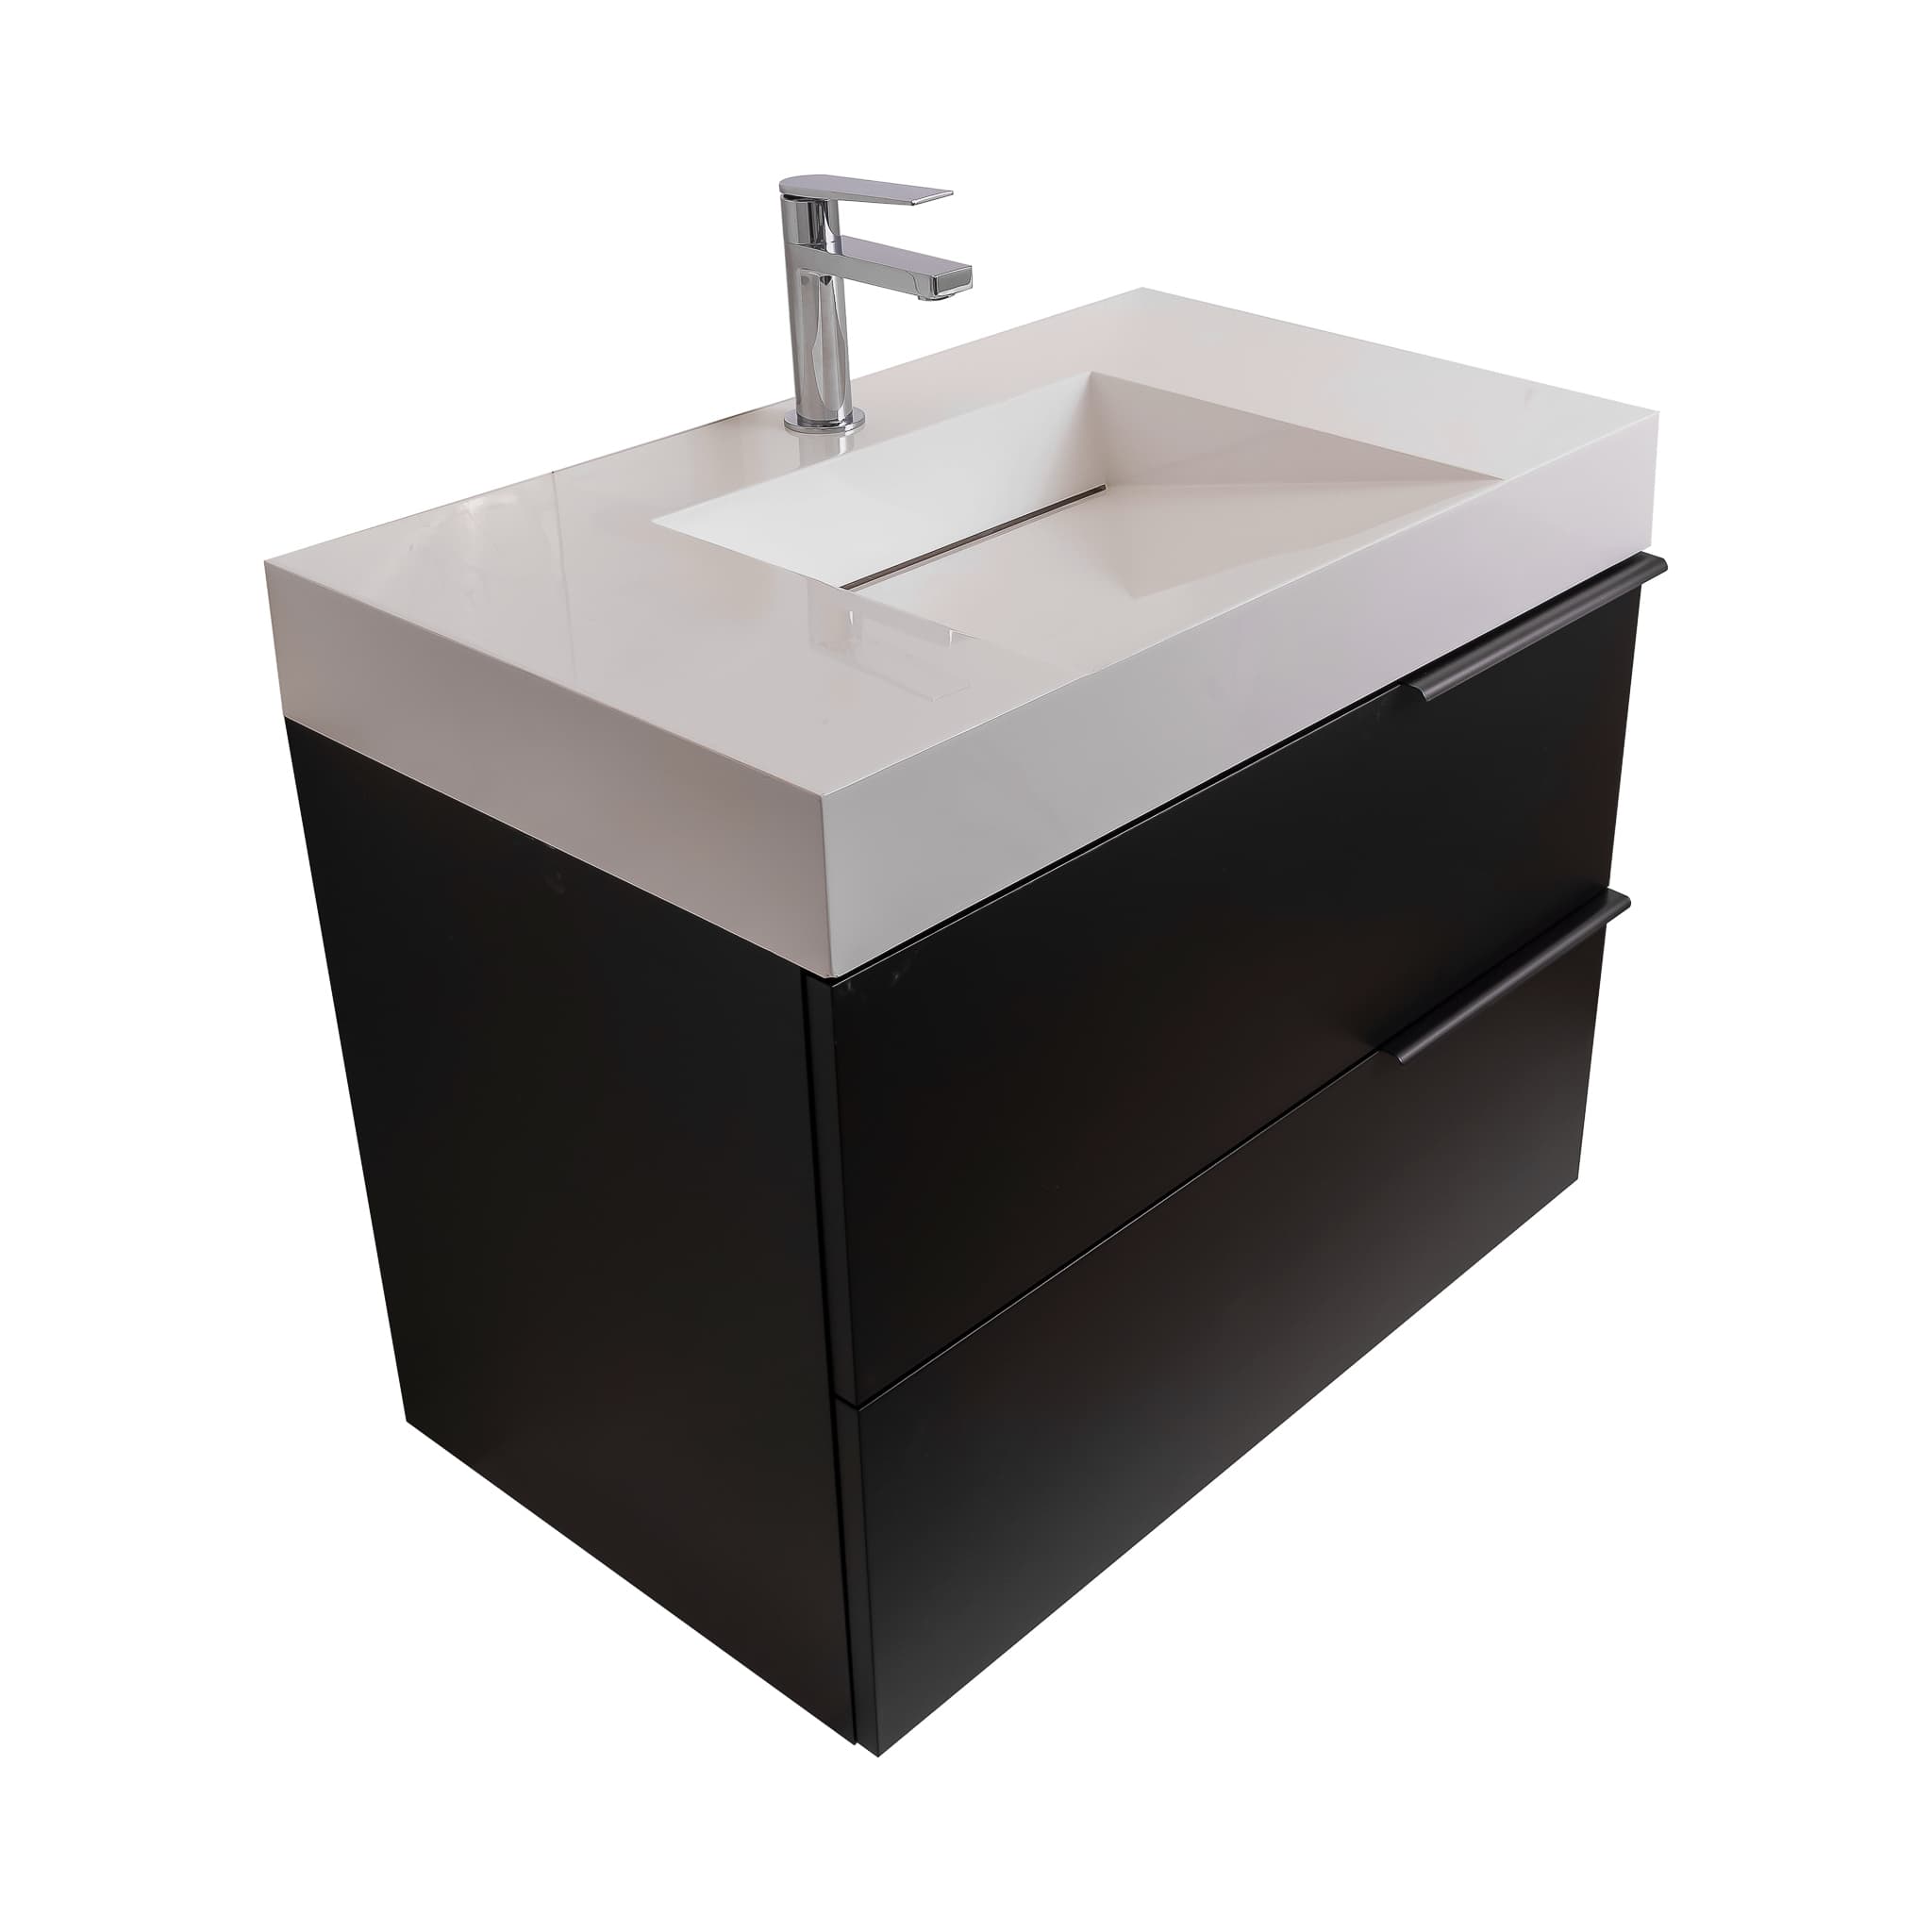 Mallorca 31.5 Matte Black Cabinet, Infinity Cultured Marble Sink, Wall Mounted Modern Vanity Set